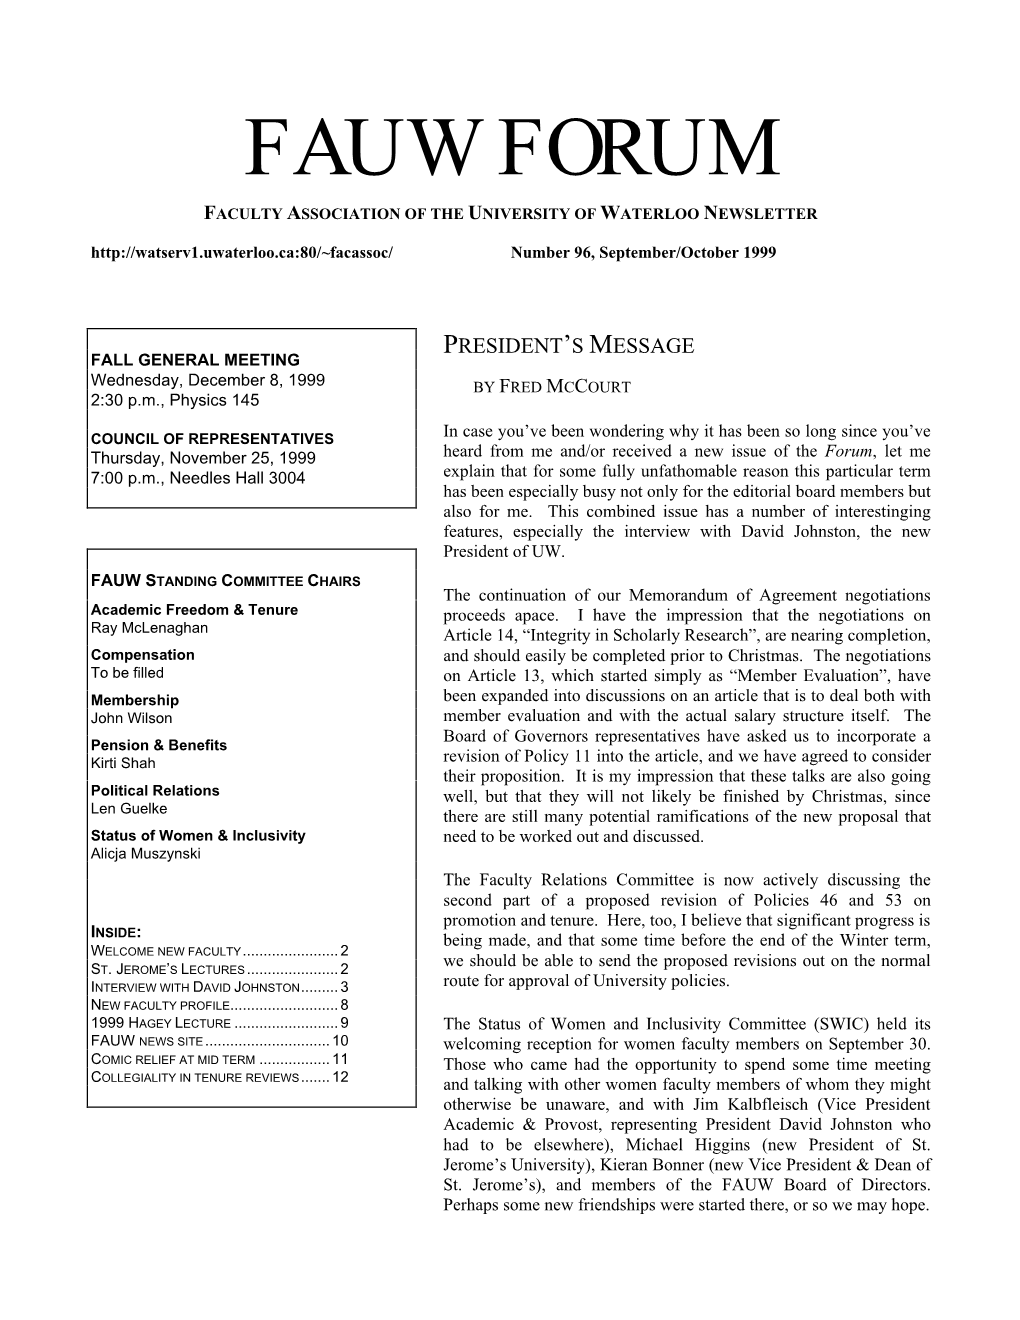 FAUW FORUM FACULTY ASSOCIATION of the UNIVERSITY of WATERLOO NEWSLETTER Number 96, September/October 1999